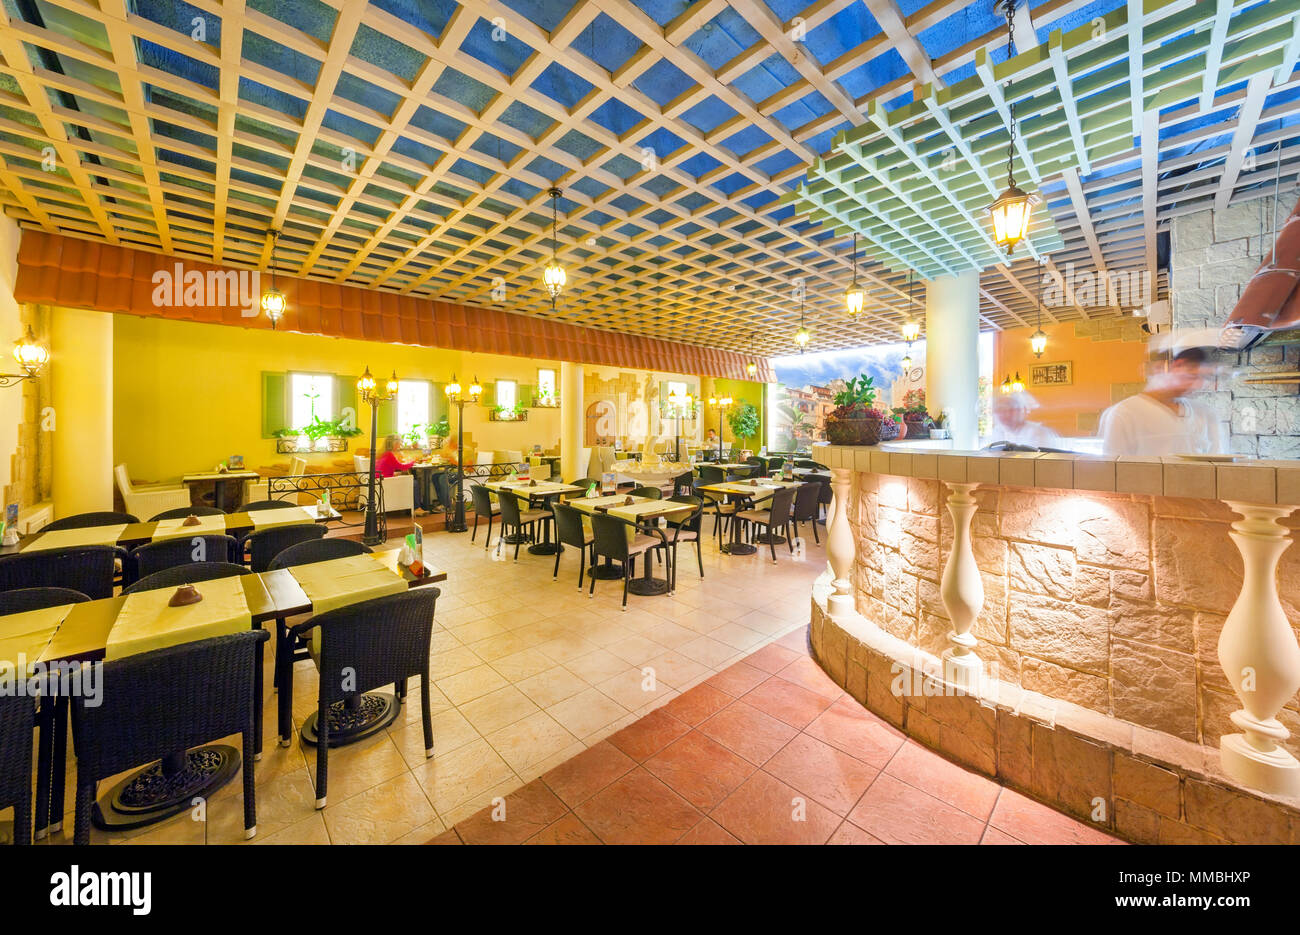 MOSCOW - AUGUST 2014: Interior of network inexpensive restaurant of Italian cuisine - 'DA PINO'. Hall with an open kitchen decorated for the old Itali Stock Photo